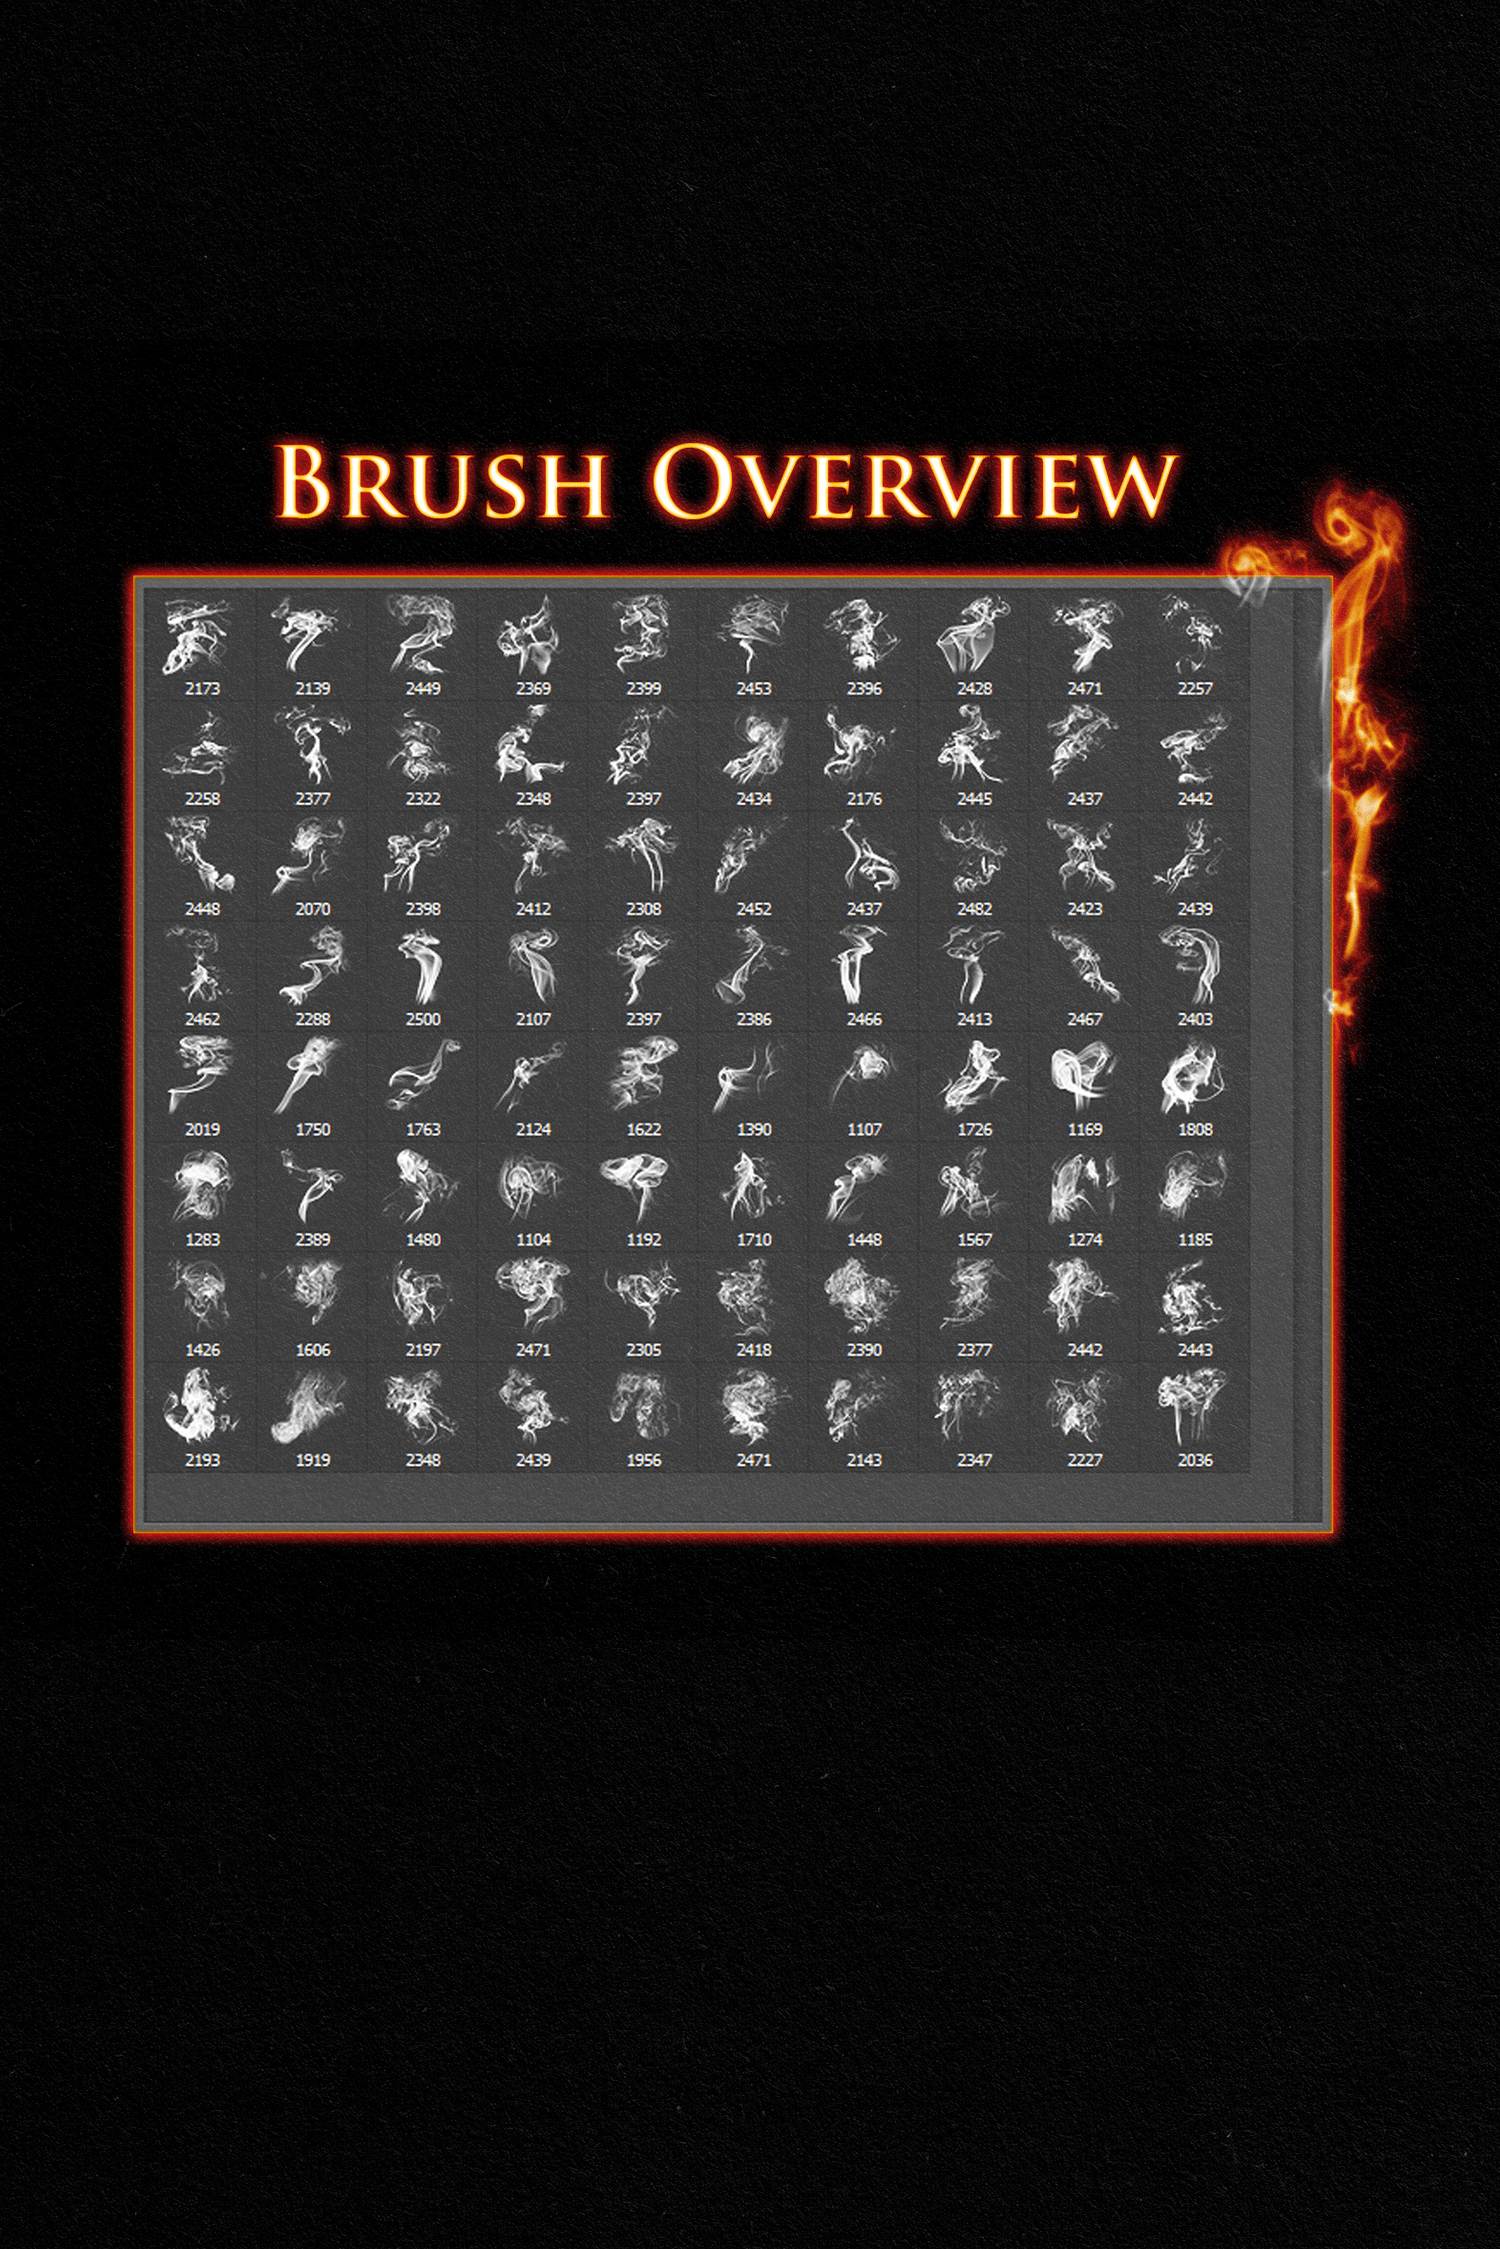 Smoke and Fire Brushes by Reto Scheiwiller